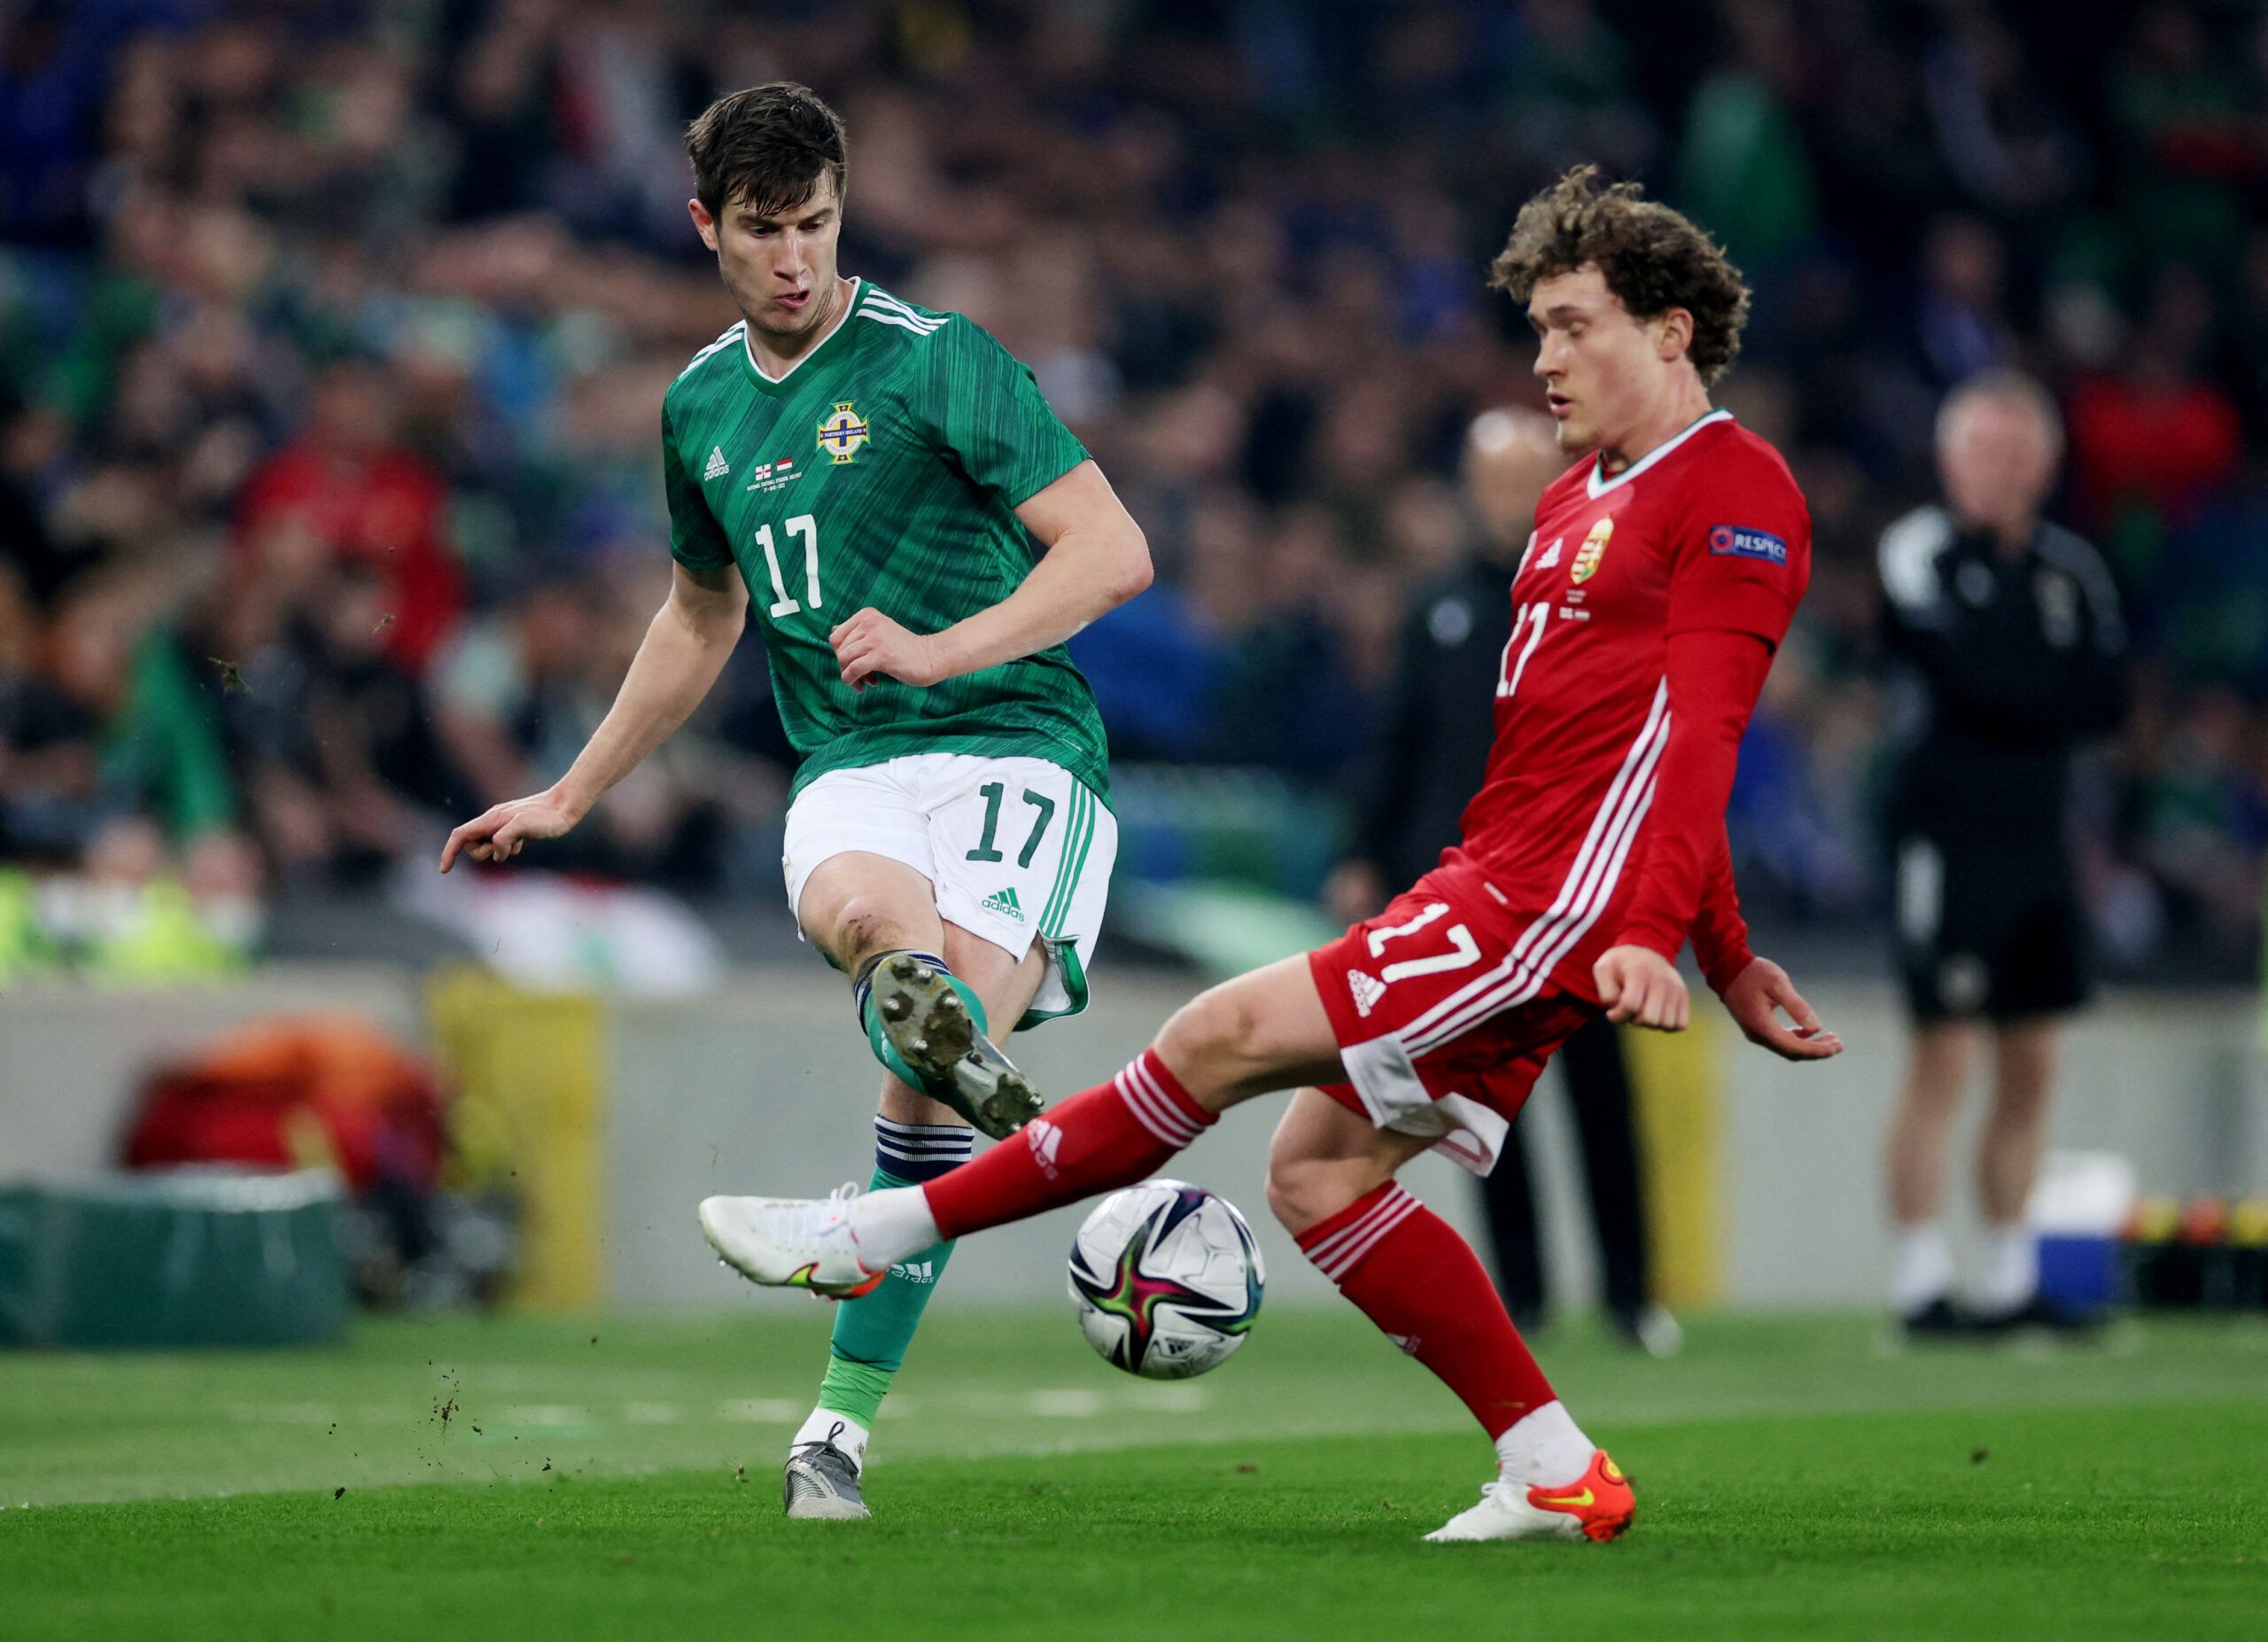 Soccer Football - International Friendly - Northern Ireland v Hungary - Windsor Park, Belfast, Northern Ireland - March 29, 2022 Northern Ireland's Paddy McNair in action with Hungary's Callum Styles Action Images via Reuters/Paul Childs